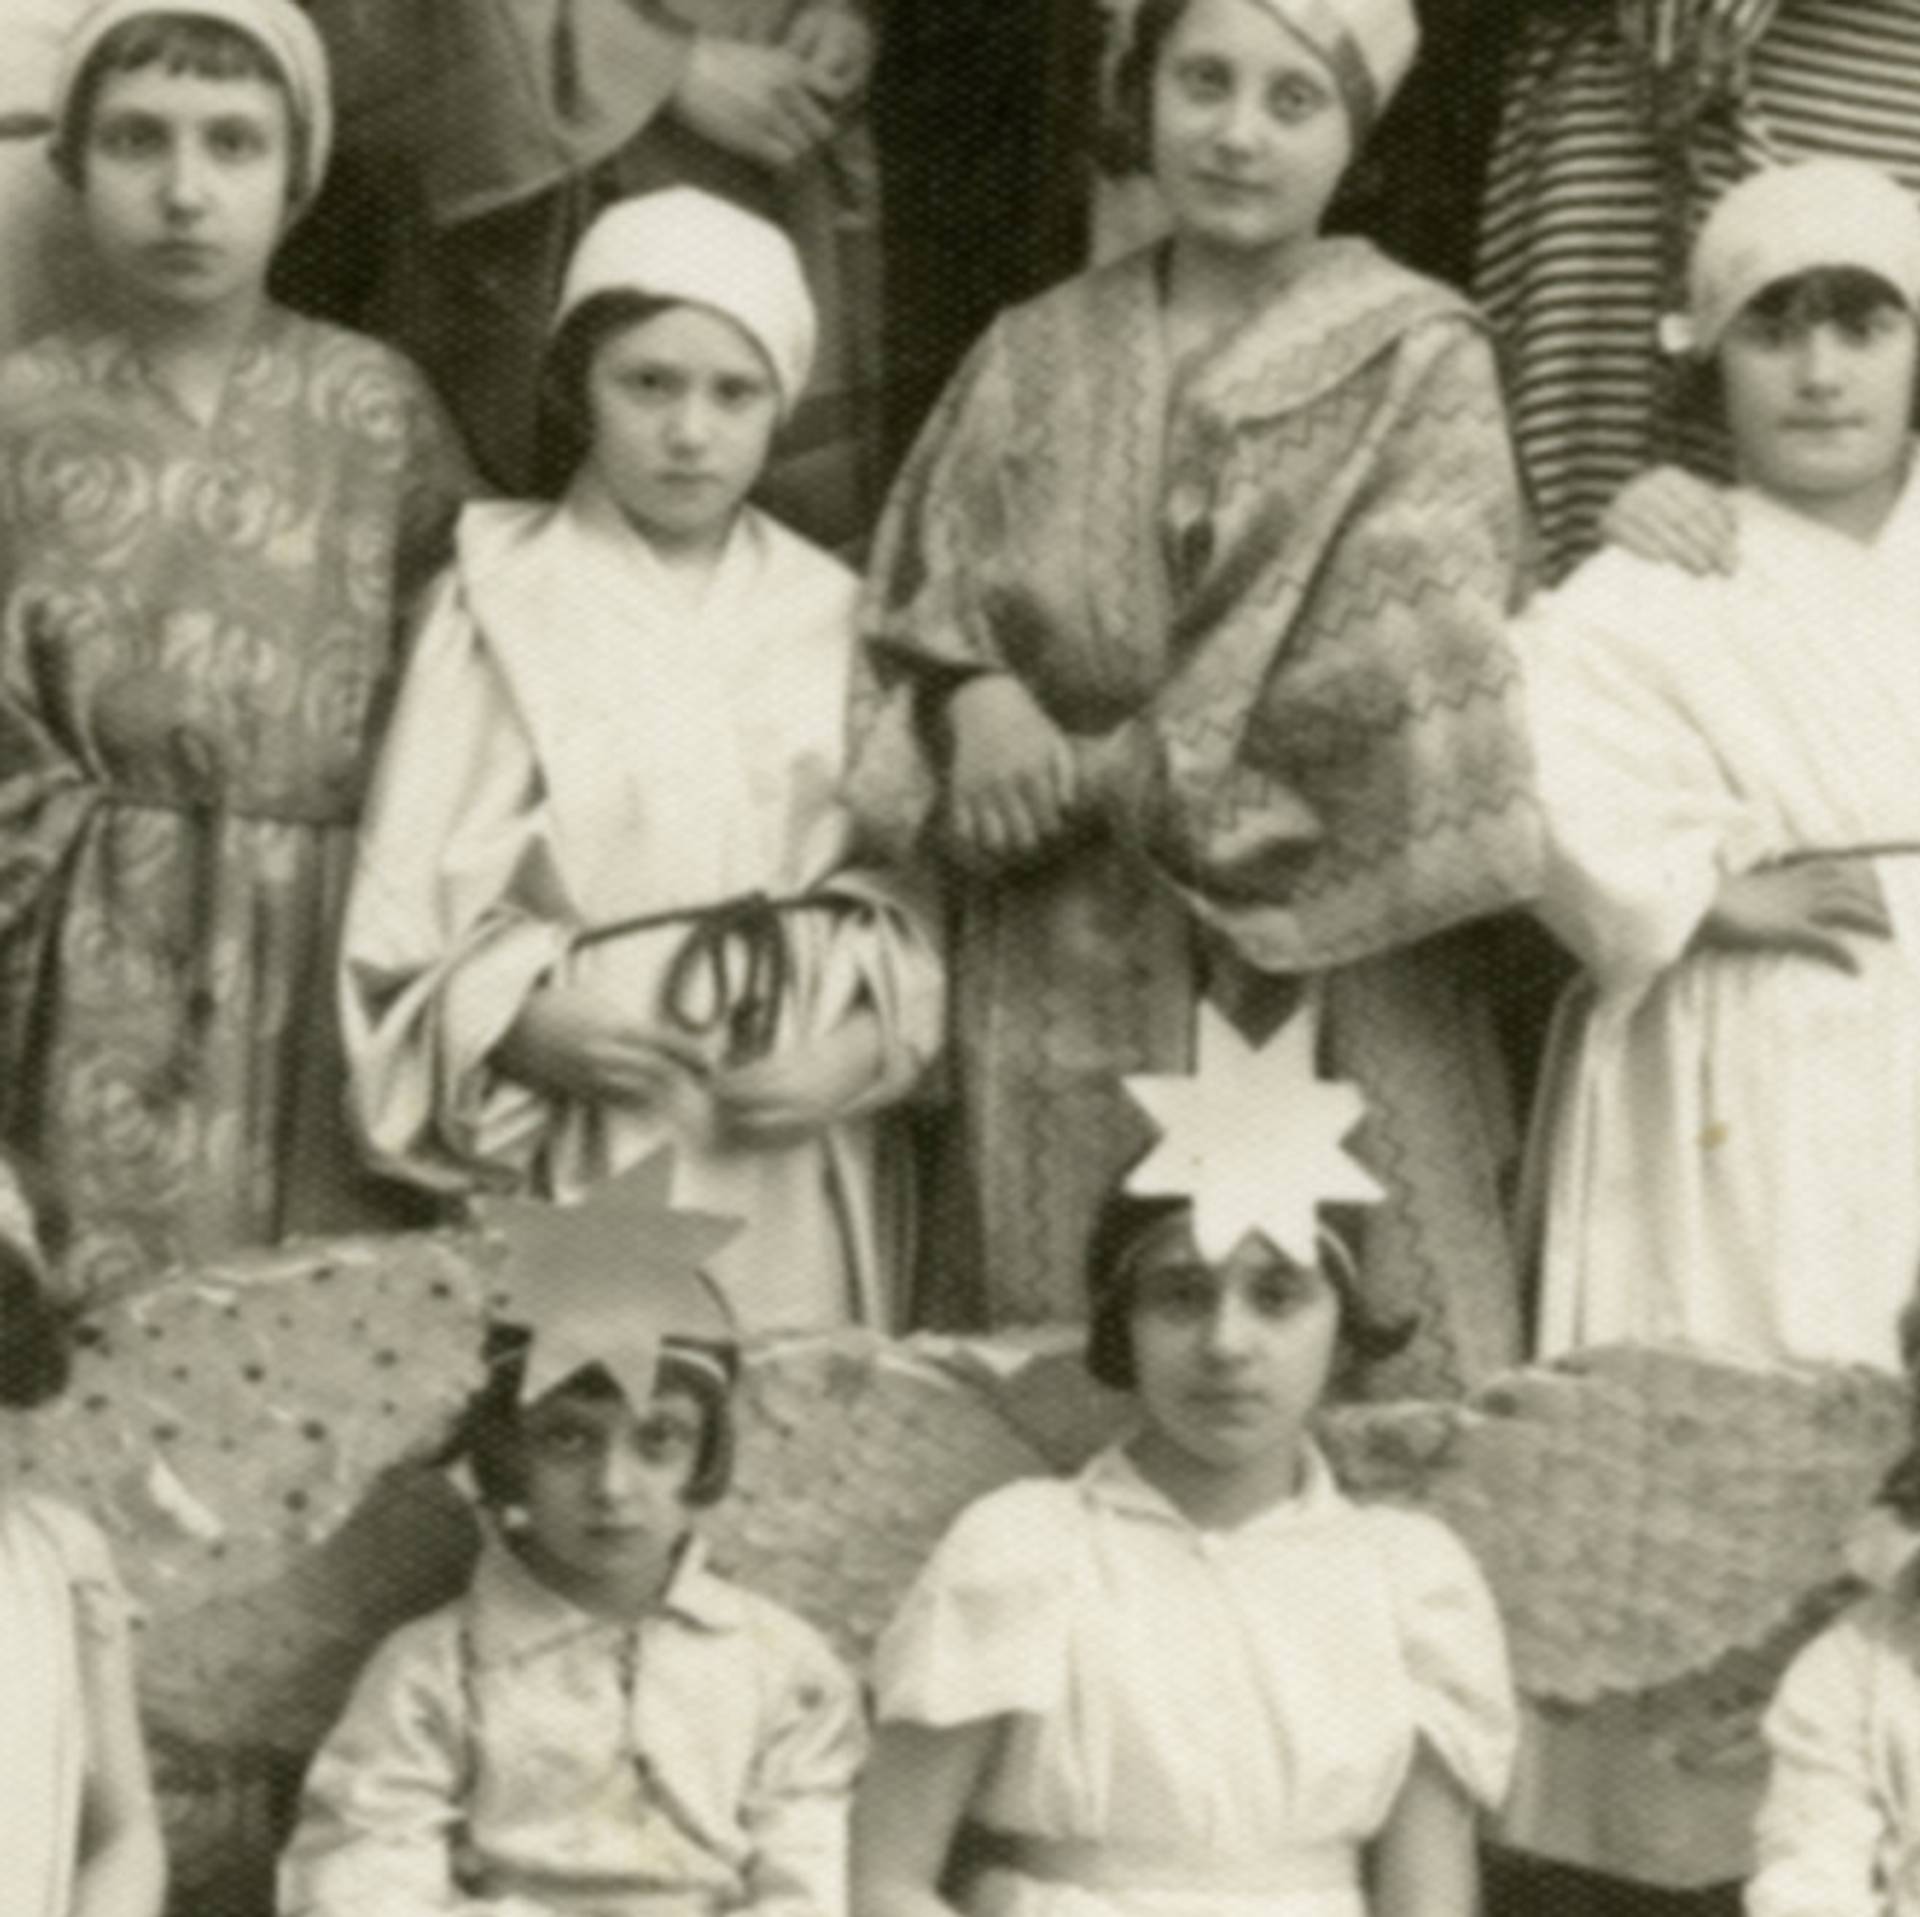 Beis Yaakov students in Buczacz, Poland, perform in a play called ‘Joseph and His Brothers,’ circa 1934